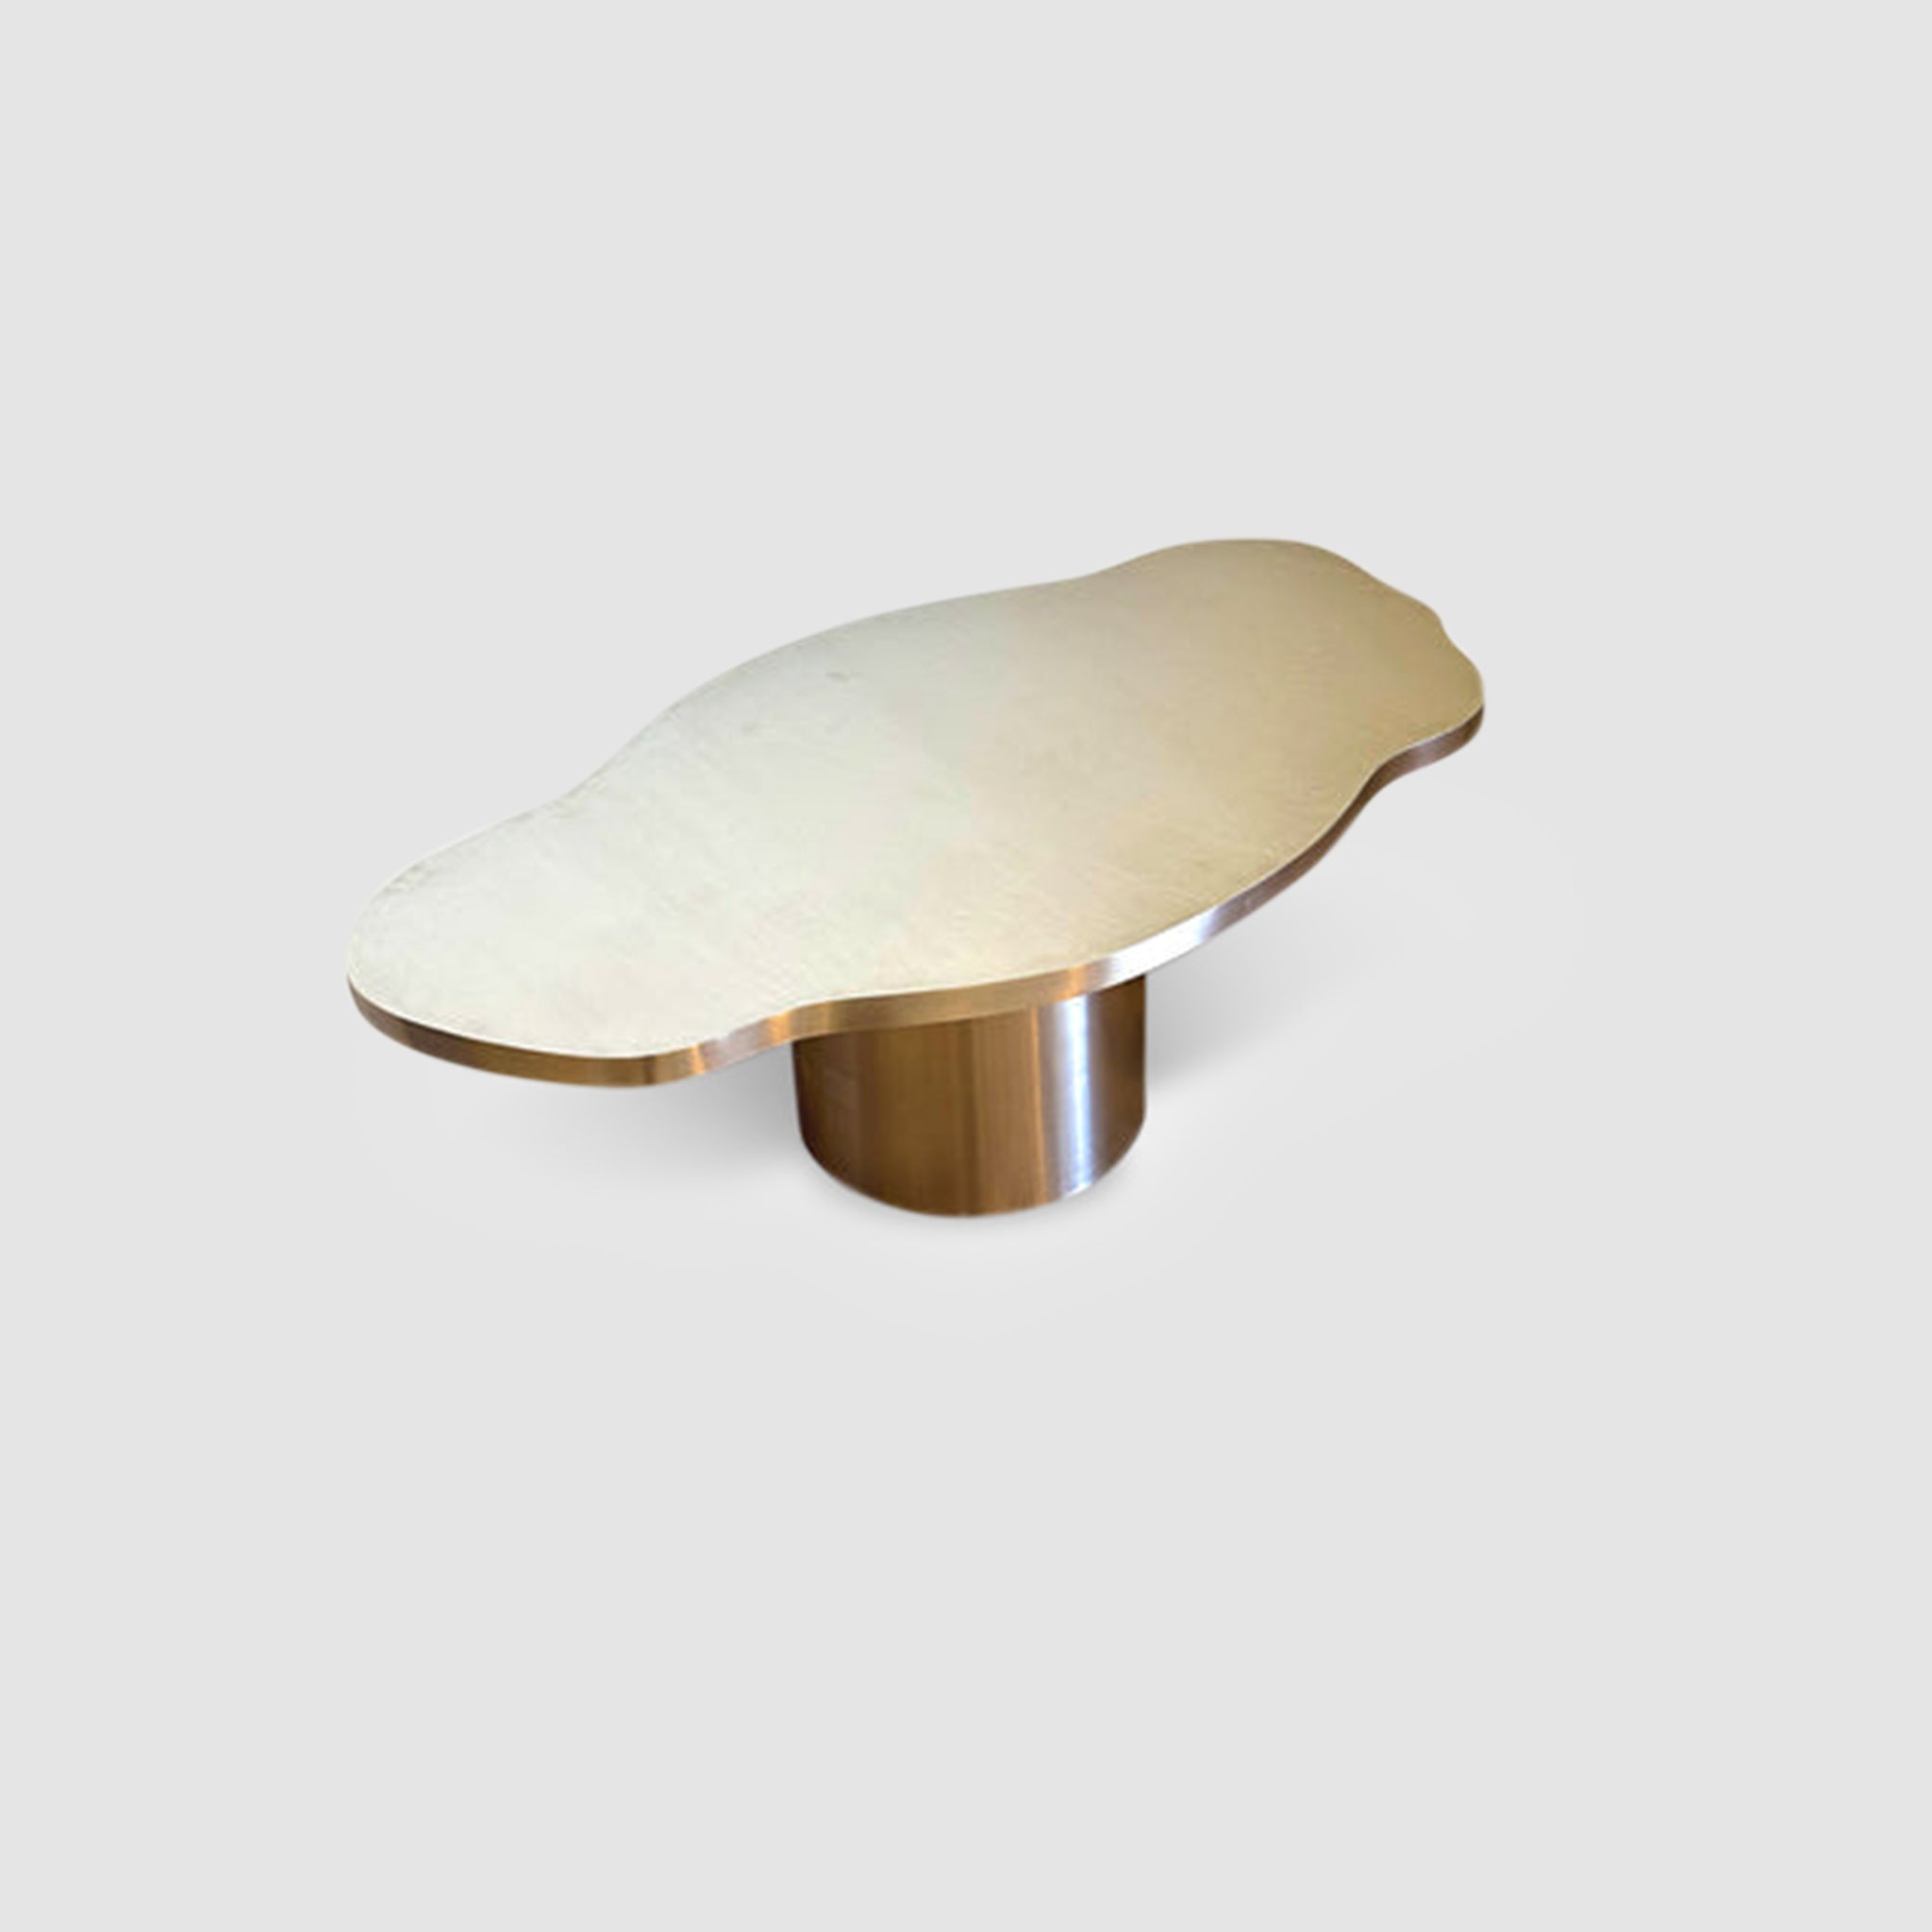 Modern Coffee Table: The Jamie Table's clean lines complement any living space.